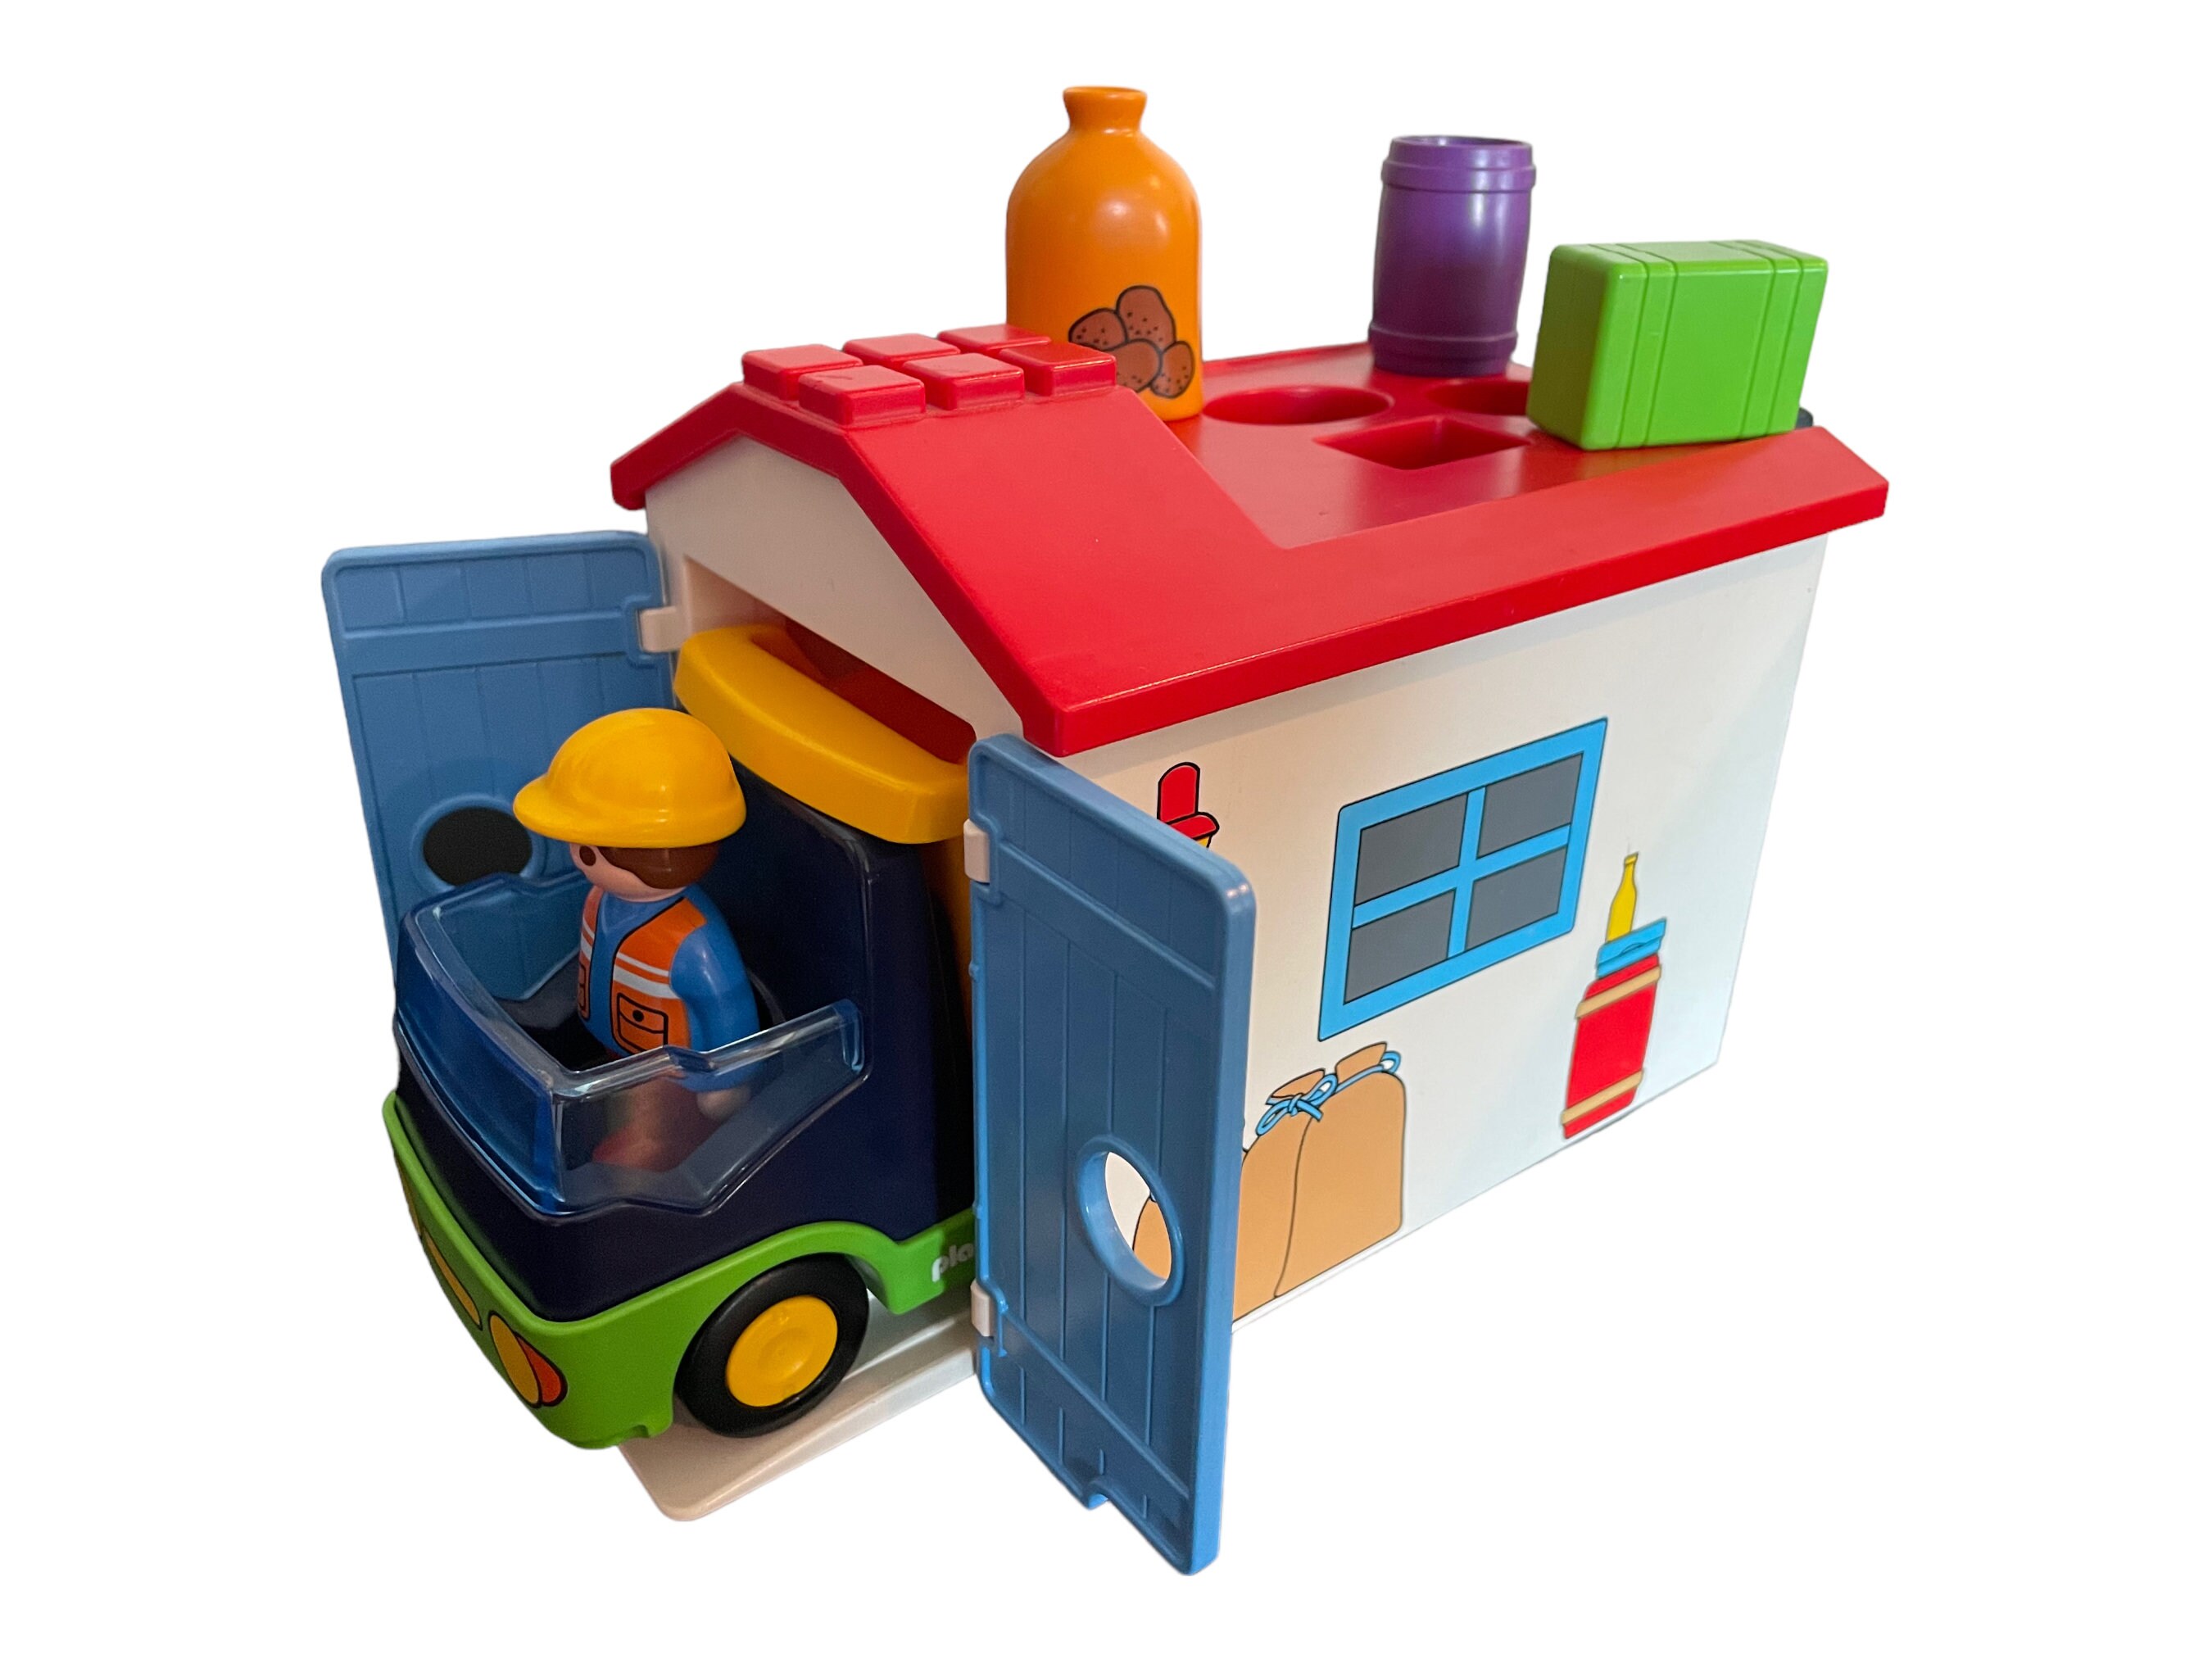 Playmobil 1.2.3 Truck with Garage (6759)